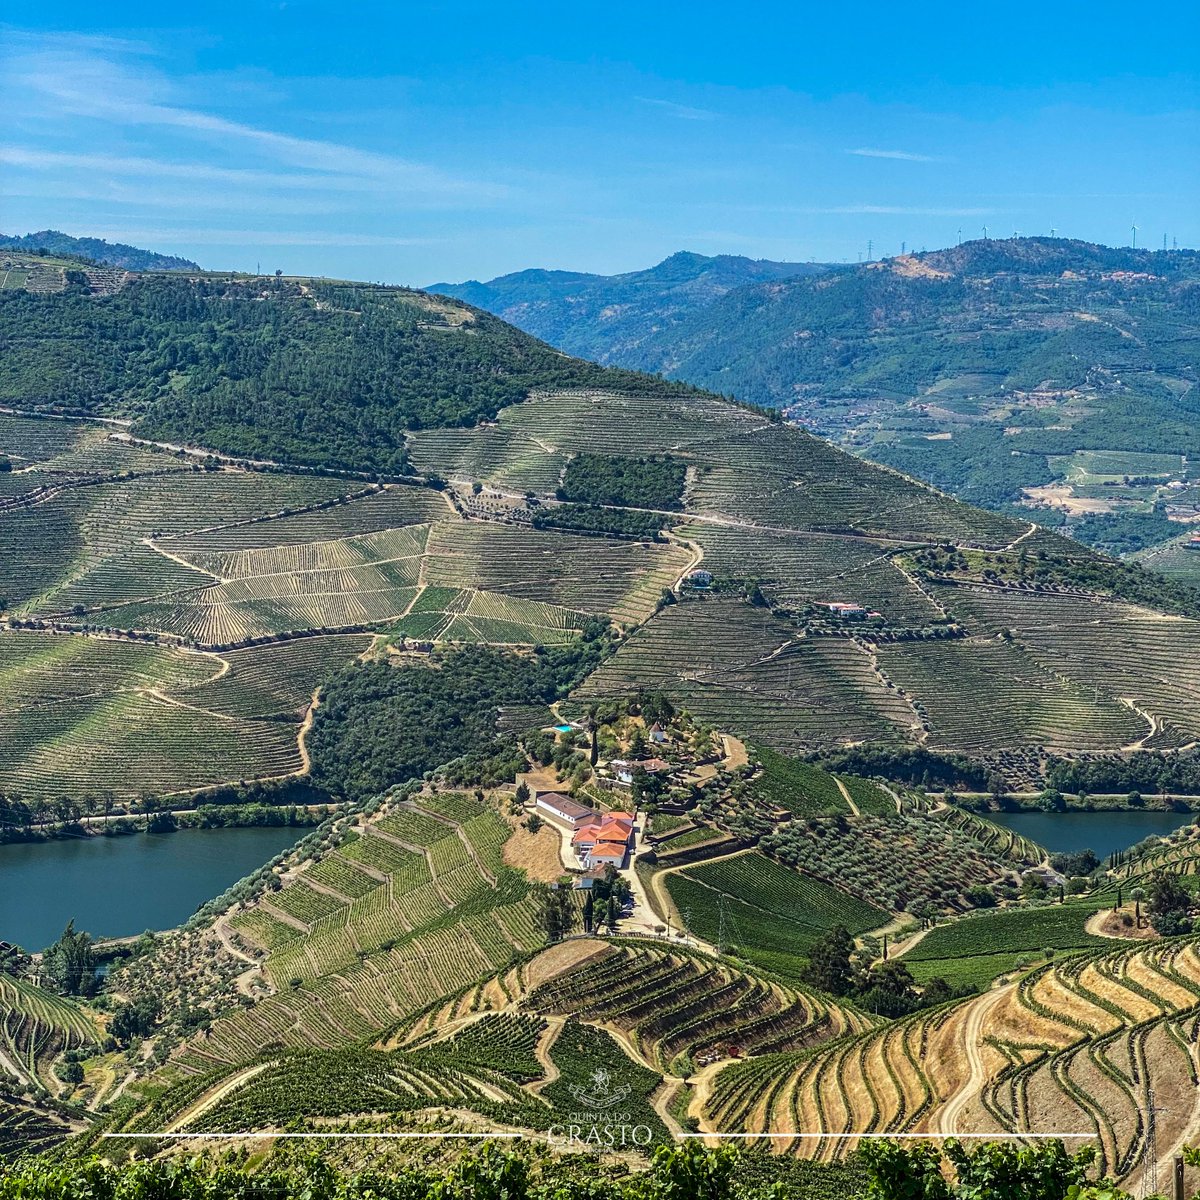 The #vineyards have different sun exposures: Vinha Maria Teresa faces east; the vineyards on the other slope of Quinta do Crasto face west; and the vineyards in the location where this photograph was taken face south. #Douro #wines are so unique! 🍇🙌🏼✨
#Wine #WinesofPortugal